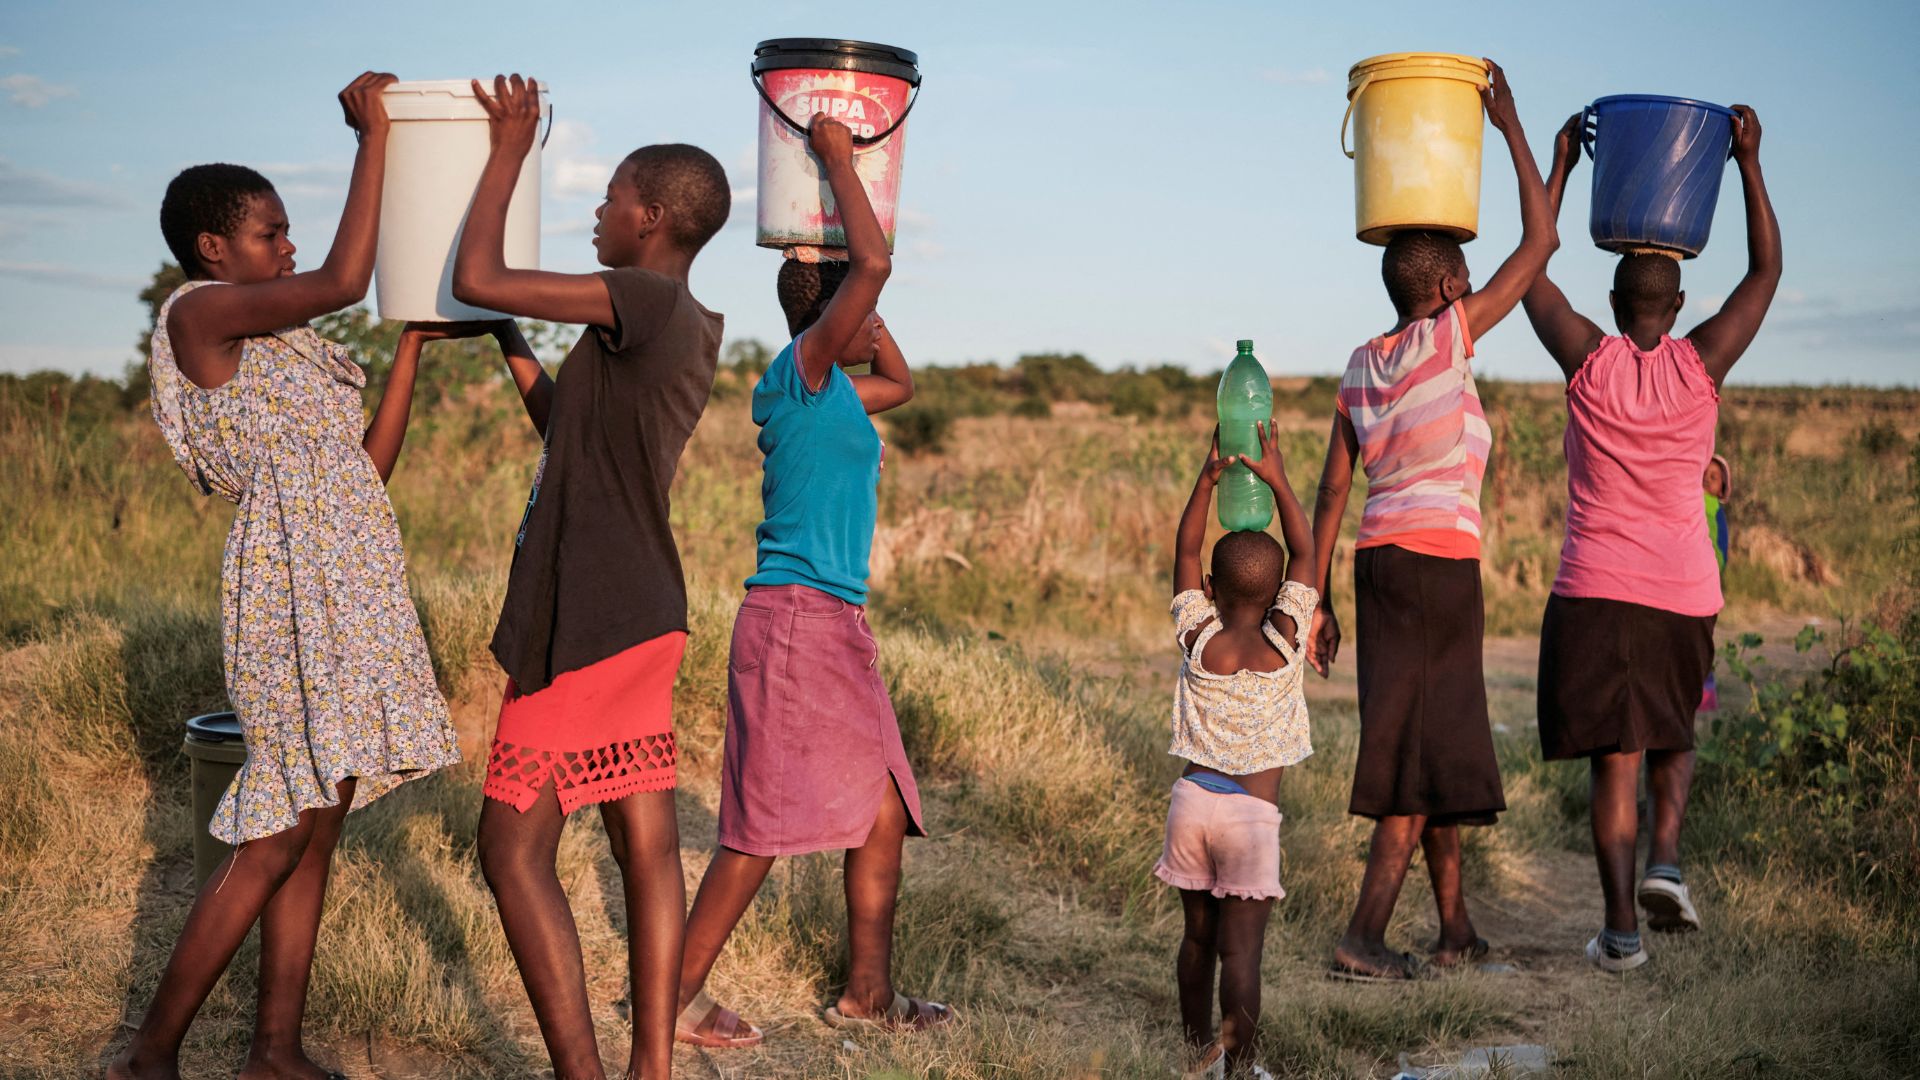 Residents of Pumula East township walk home after fetching water from a well, as temperatures soar during an El Nino-related heatwave and  in Bulawayo, Zimbabwe last week. /KB Mpofu/Reuters